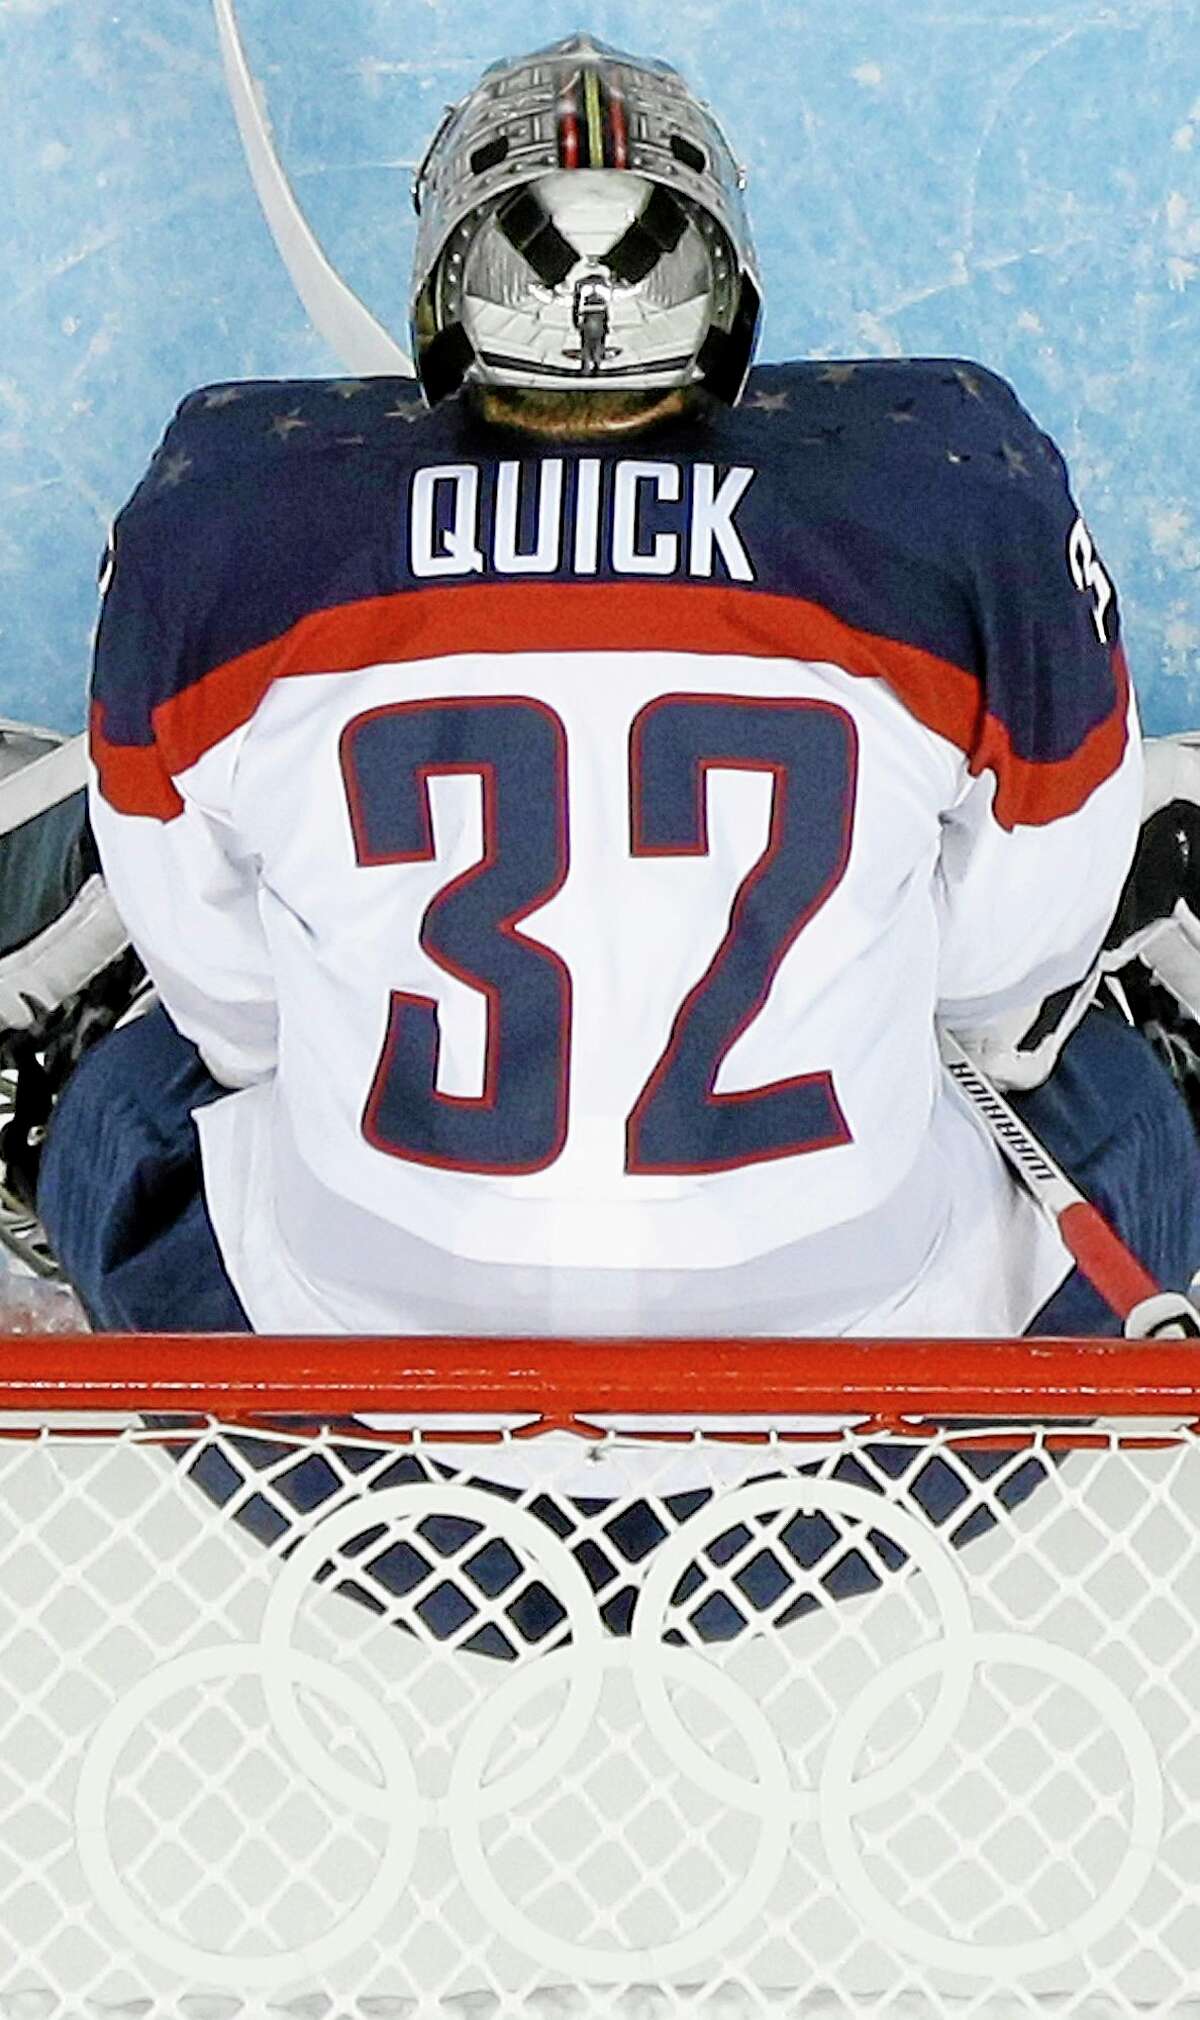 Team USA goaltender Jonathan Quick of Hamden stands in net during the second period of the Americans’ 7-1 win Thursday at the Winter Olympics at Shayba Arena in Sochi, Russia.